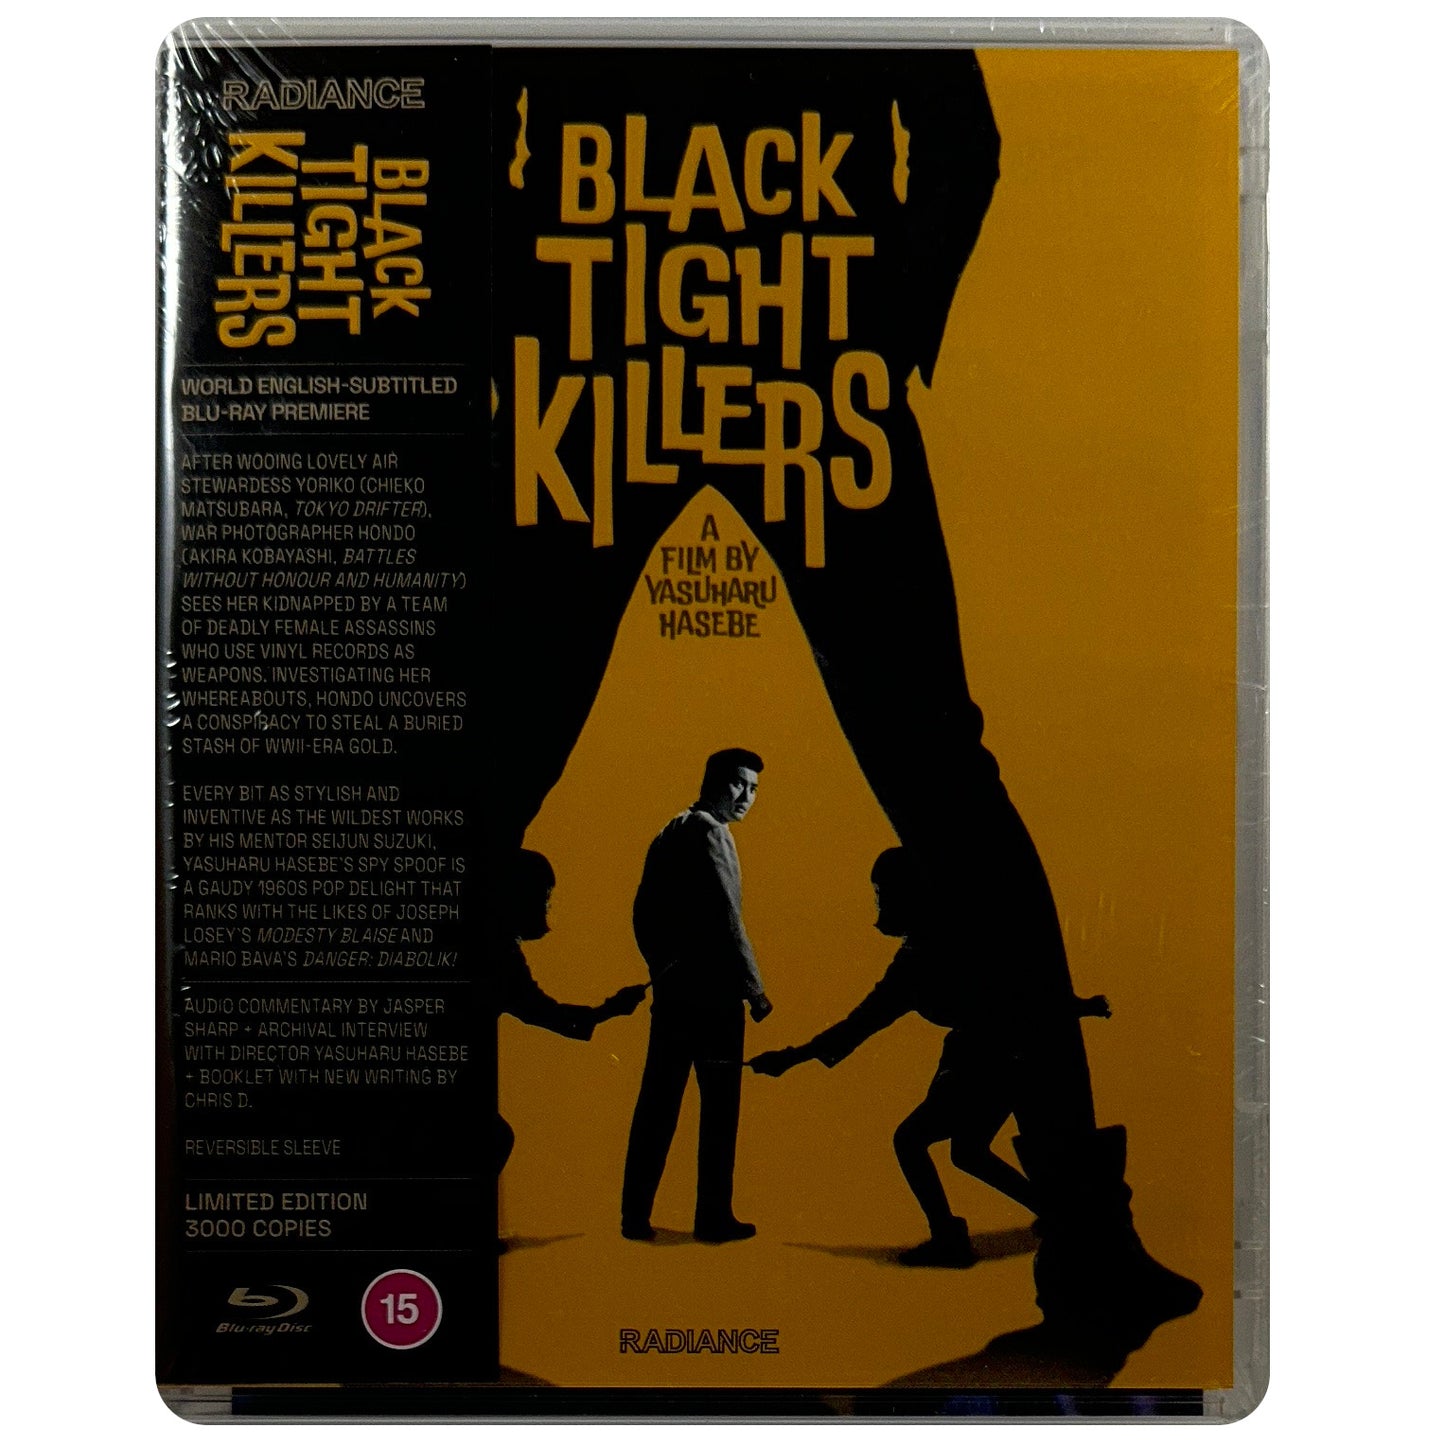 Black Tight Killers Blu-Ray - Limited Edition **Replaced Case**